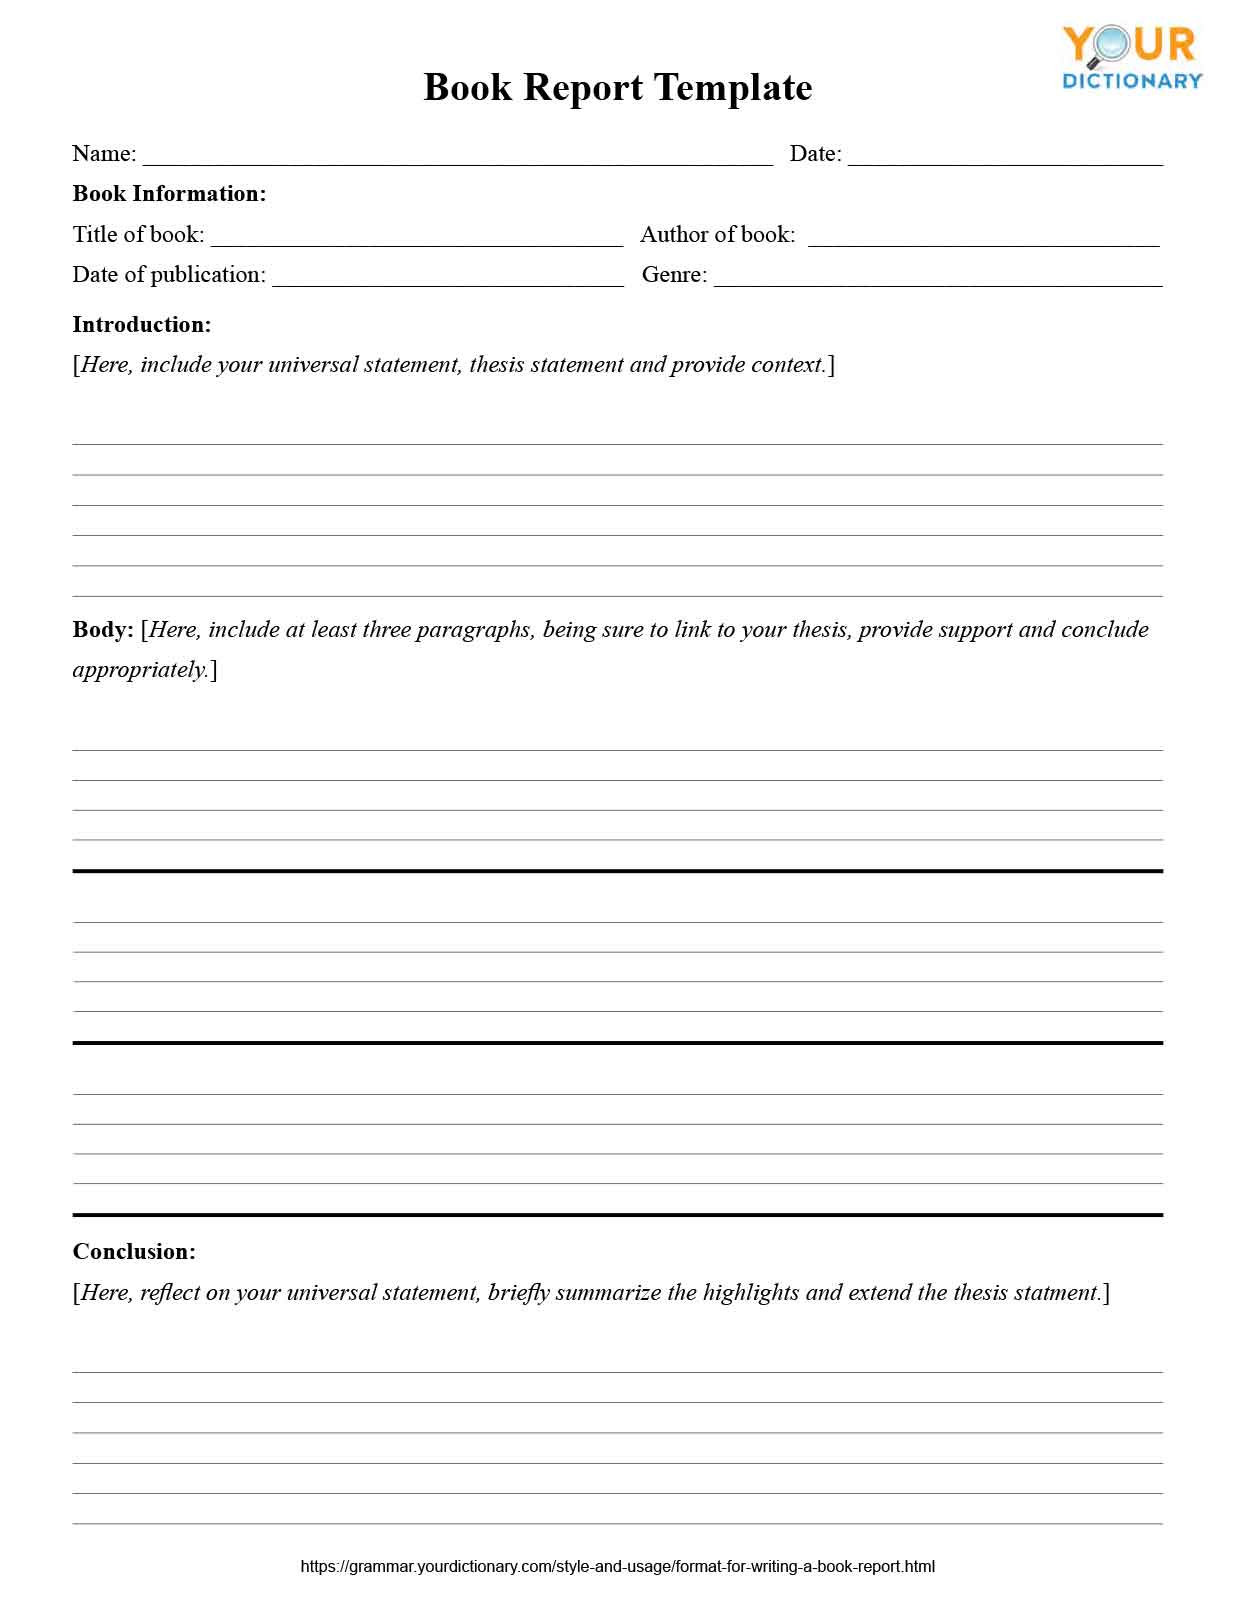 Format for Writing a Book Report With Book Report Template 6Th Grade